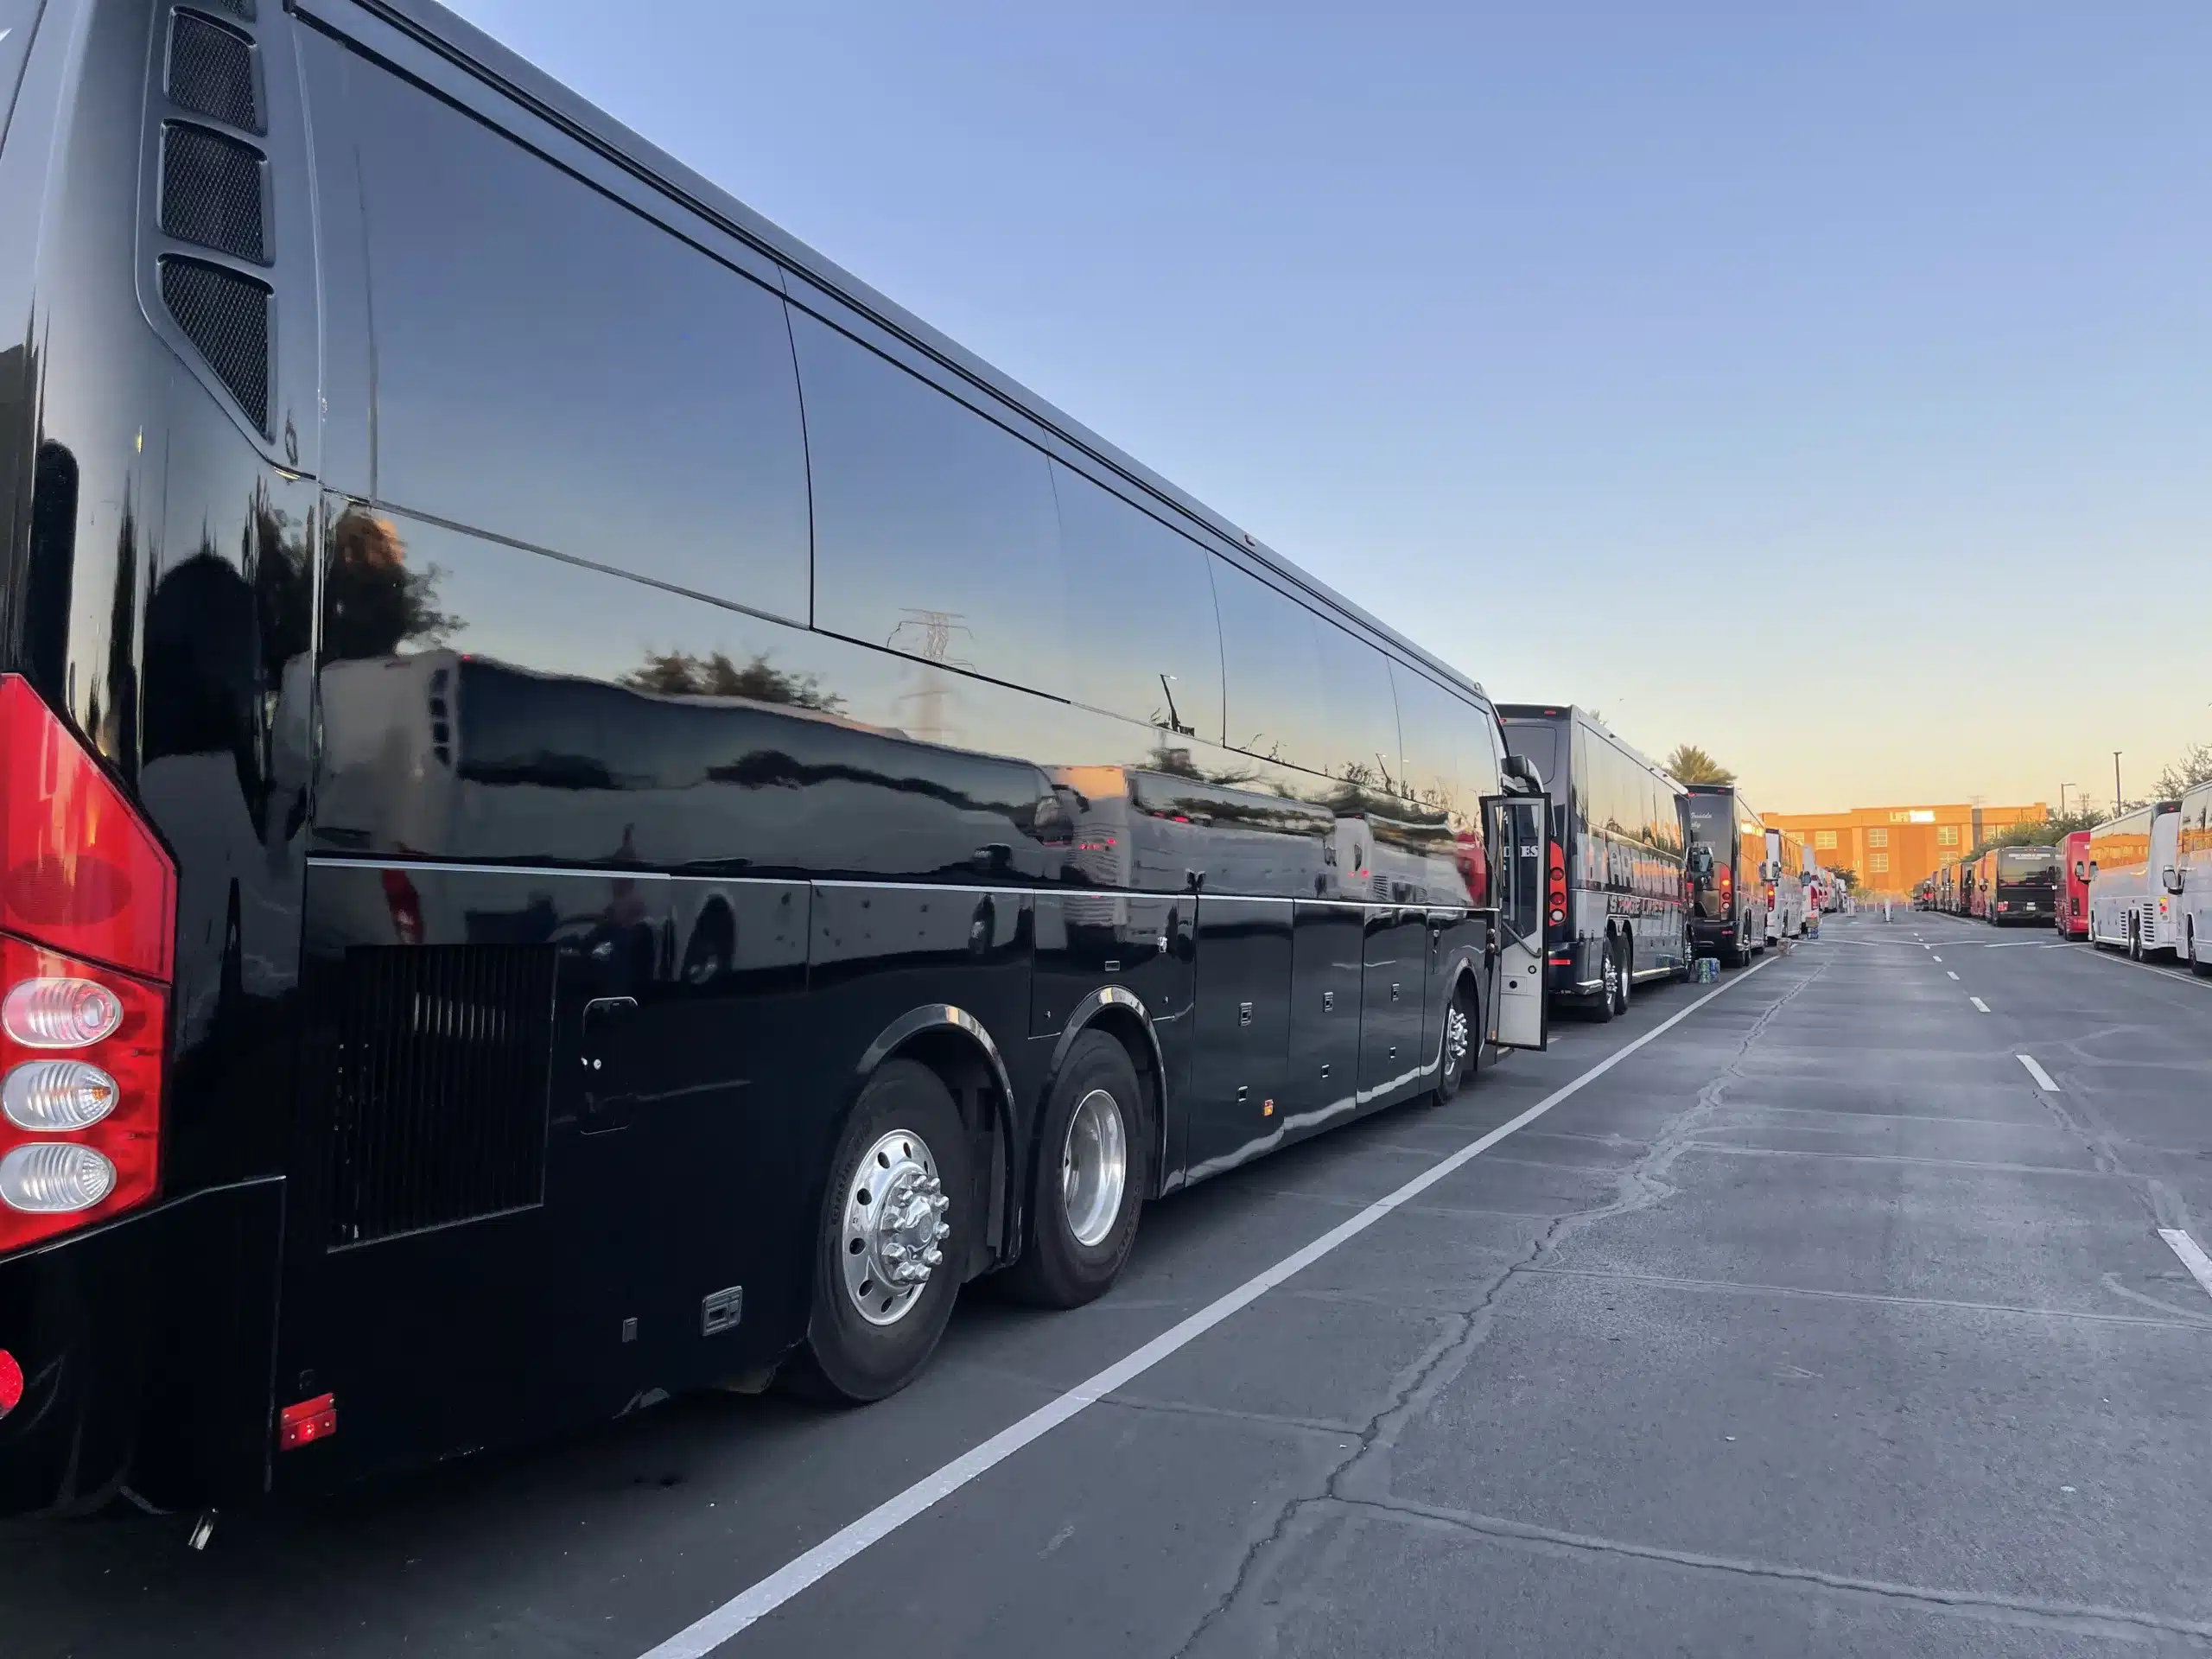 Black Bus Rentals Albuquerque Divine Charter Buses lined up at sunset